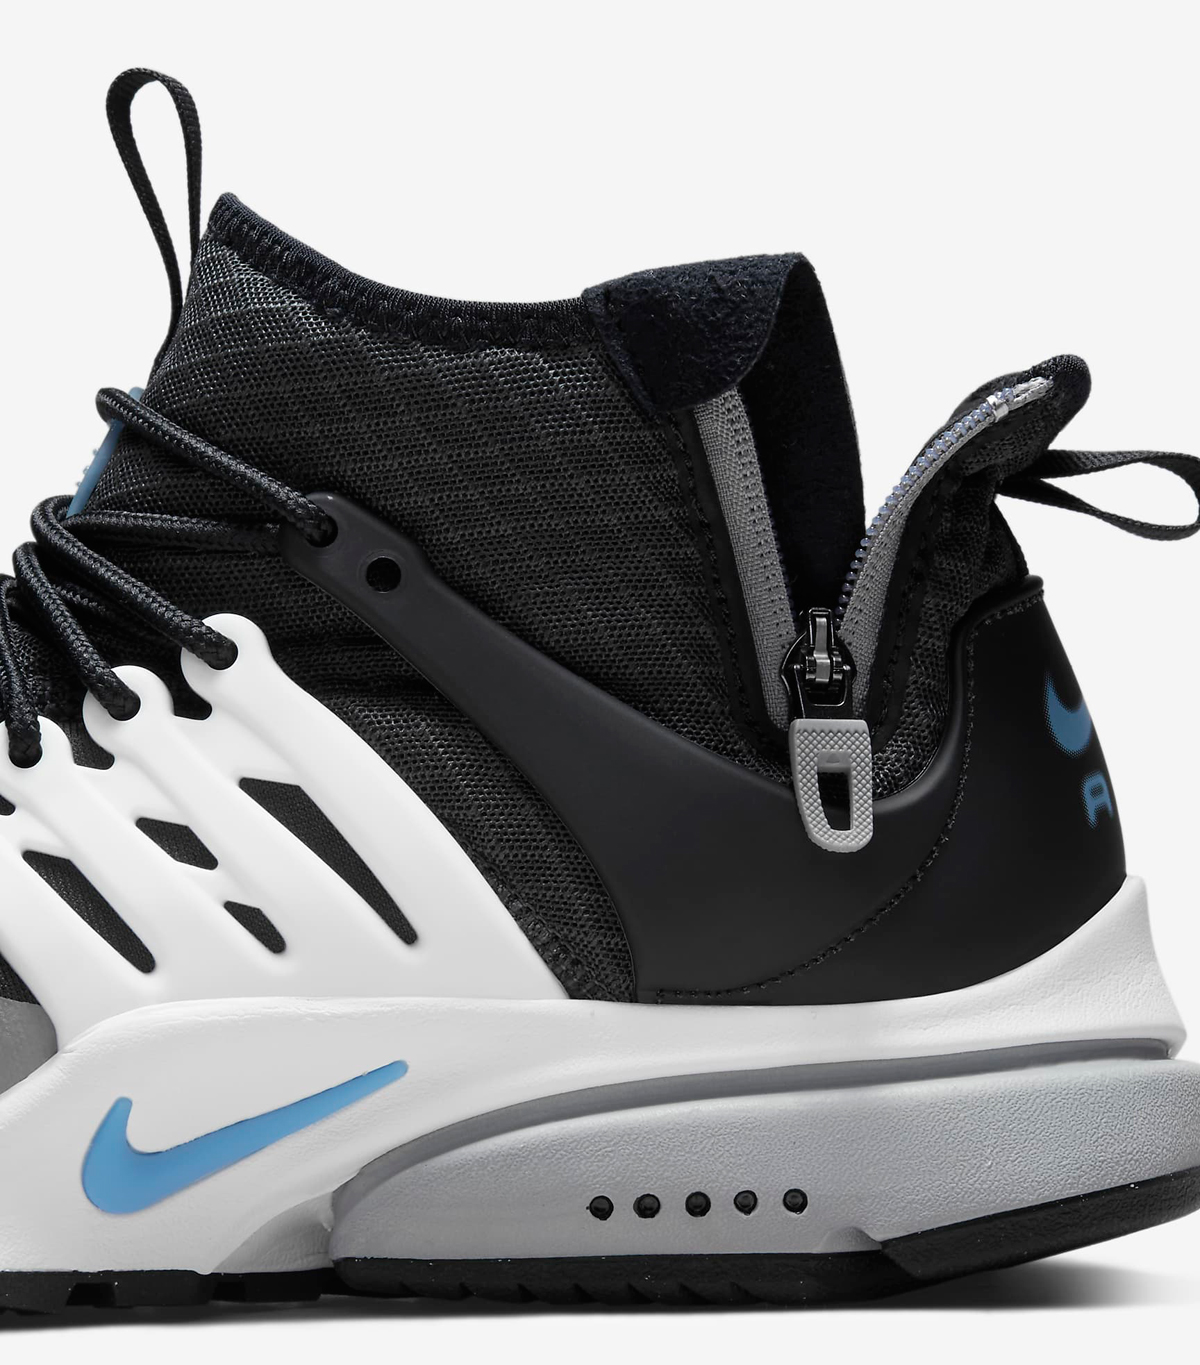 nike-air-presto-mid-utility-anthracite-summit-white-particle-grey-university-blue-release-date-9